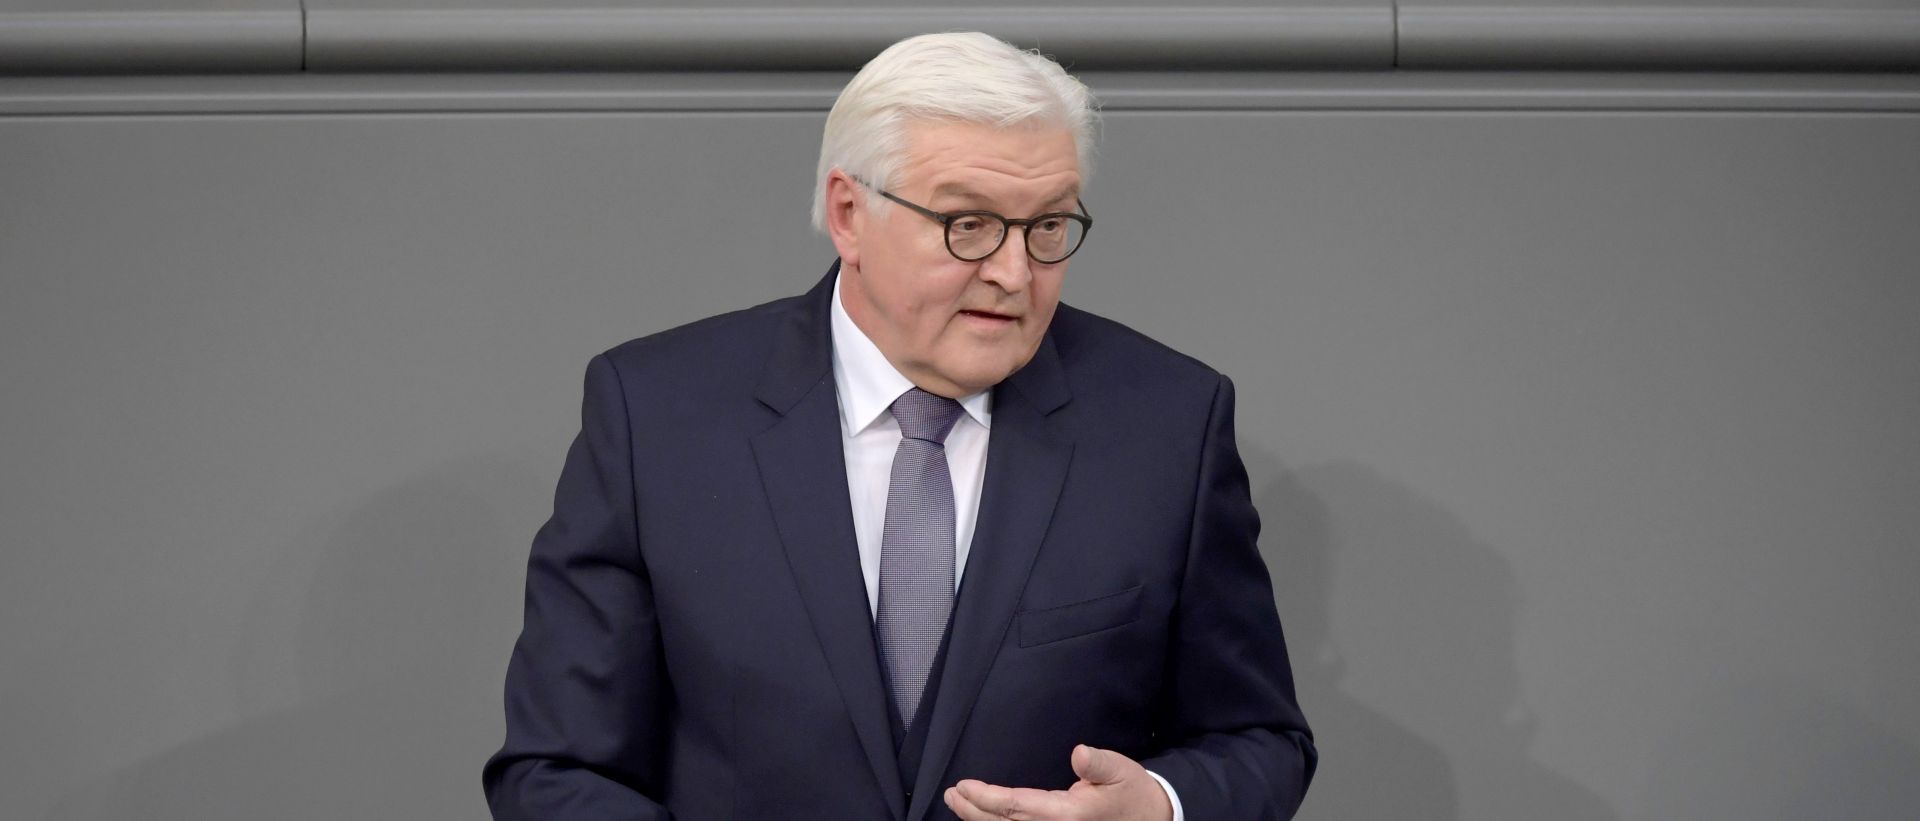 epa05787787 The newly elected German President Frank-Walter Steinmeier speaks during the Federal Assembly (Bundesversammlung) at the German 'Bundestag' parliament in Berlin, Germany, 12 February 2017. The German Federal Assembly is a special political institution that only convenes to elect the Head of State. The constitutional body gathers all members of the German 'Bundestag' Parliament and the same number of representatives of all fields of society delegated by the 16 German Federal states.  EPA/CLEMENS BILAN